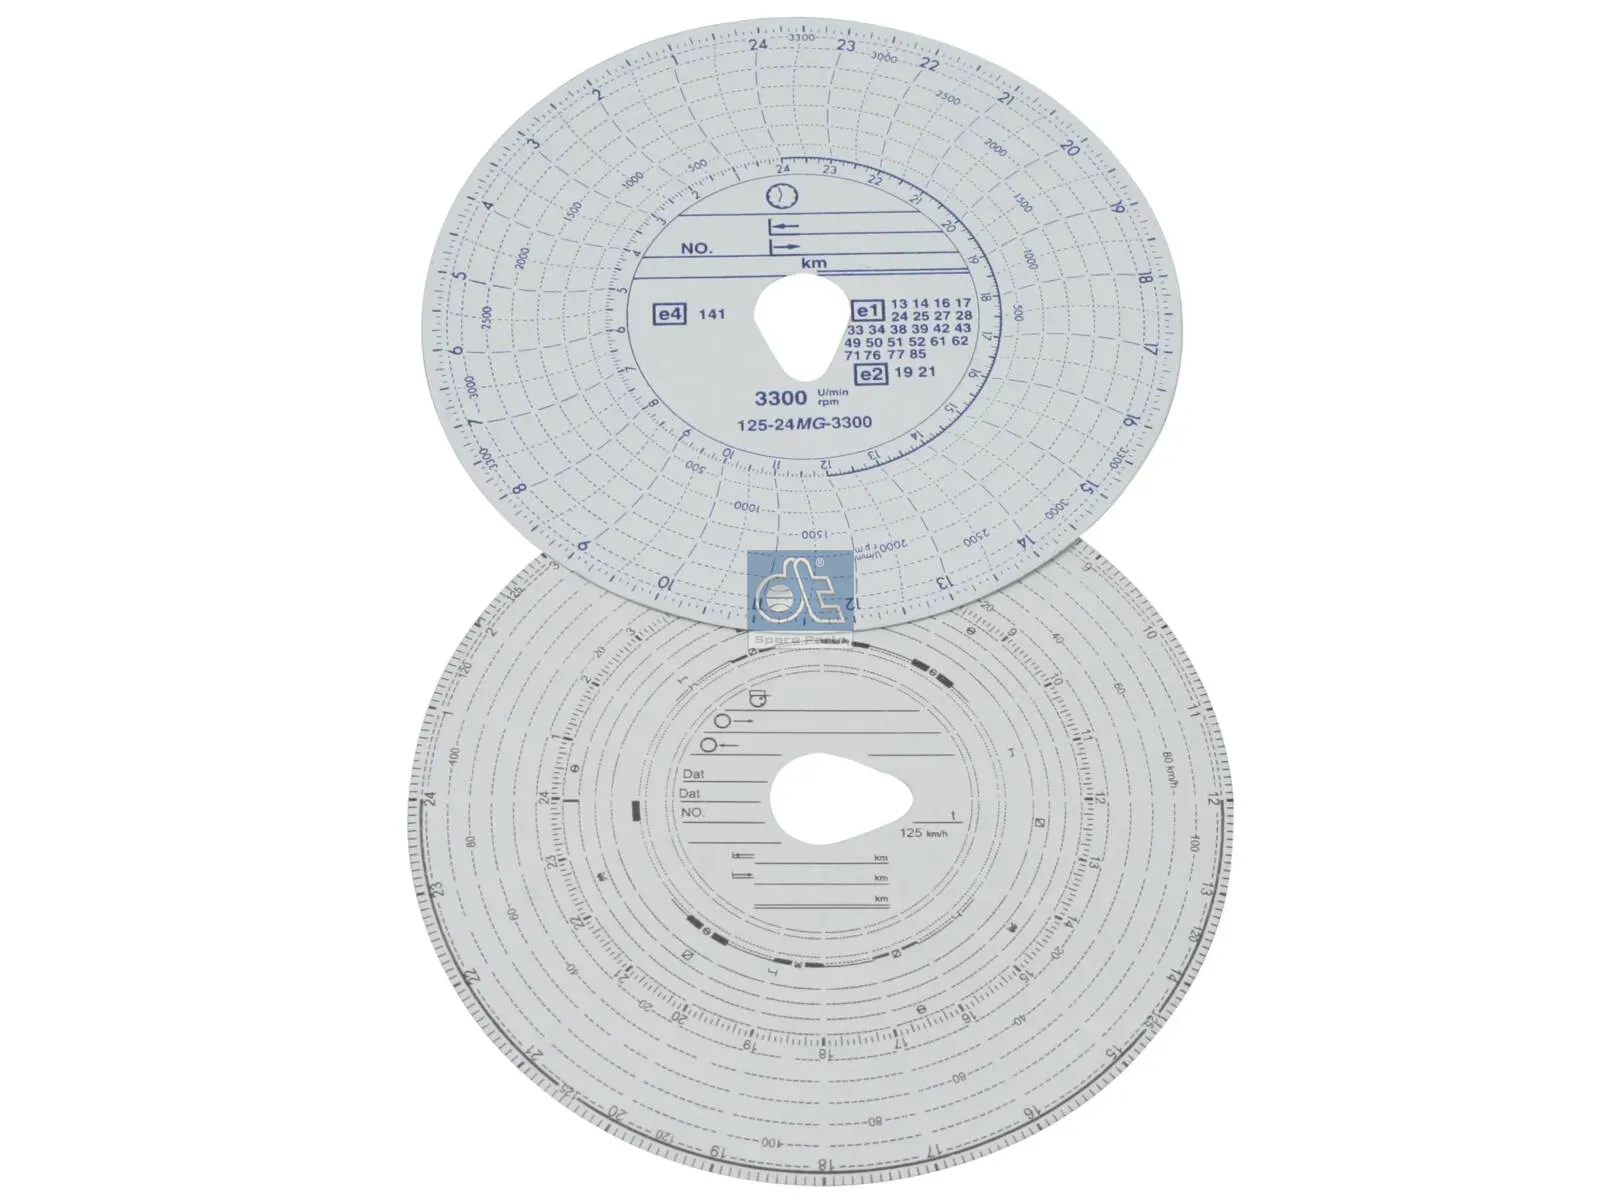 Tachograph disc set, 1 day with rpm